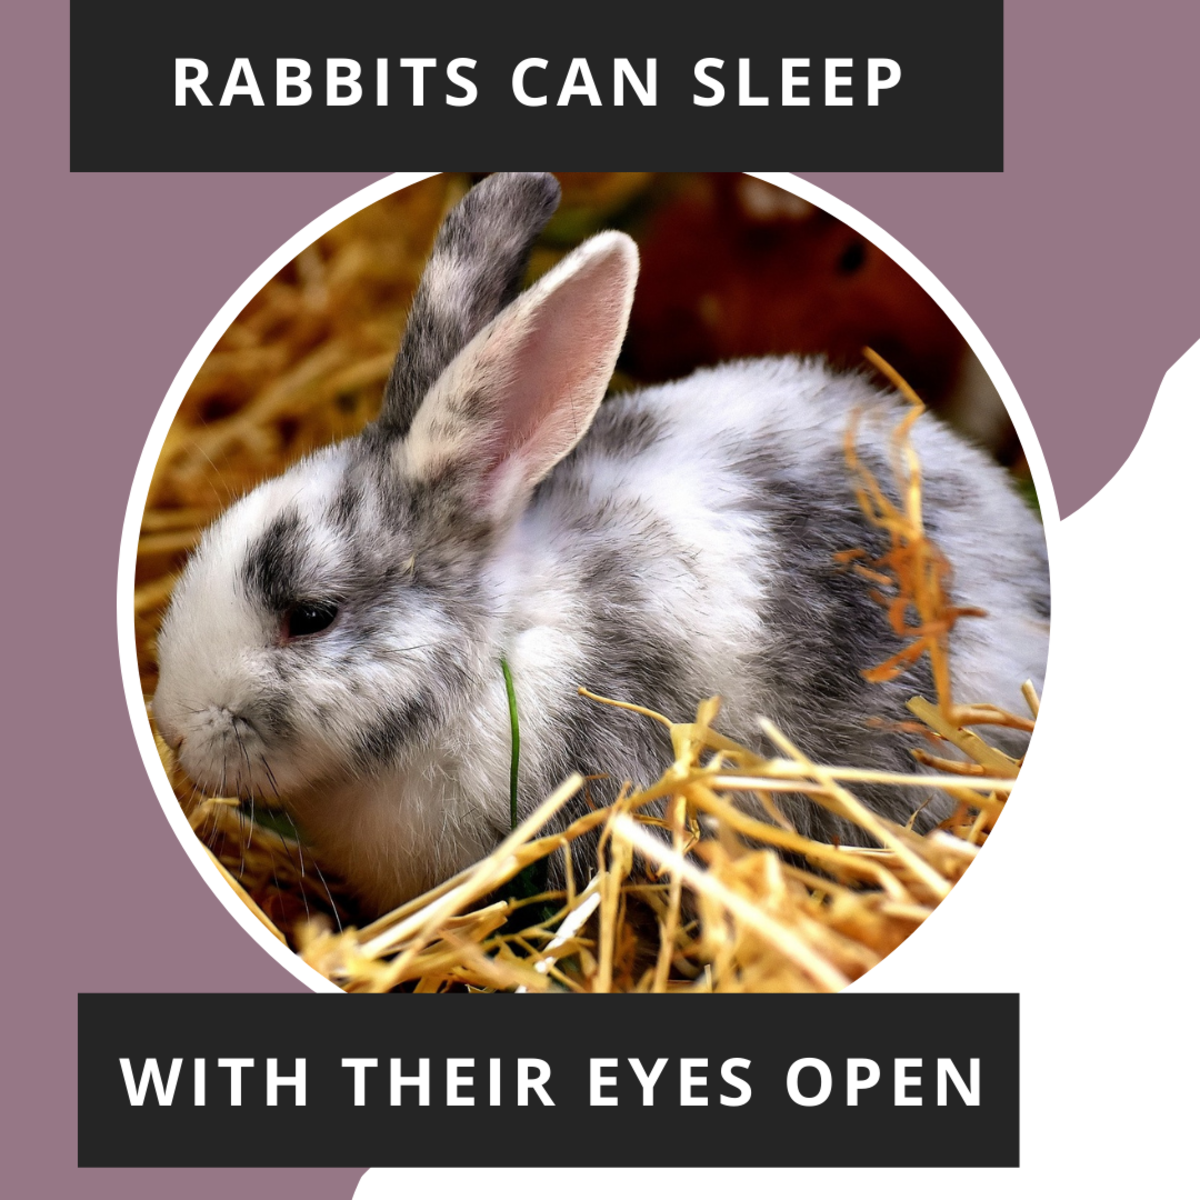 Rabbits fall asleep but also can wake up in an instant.